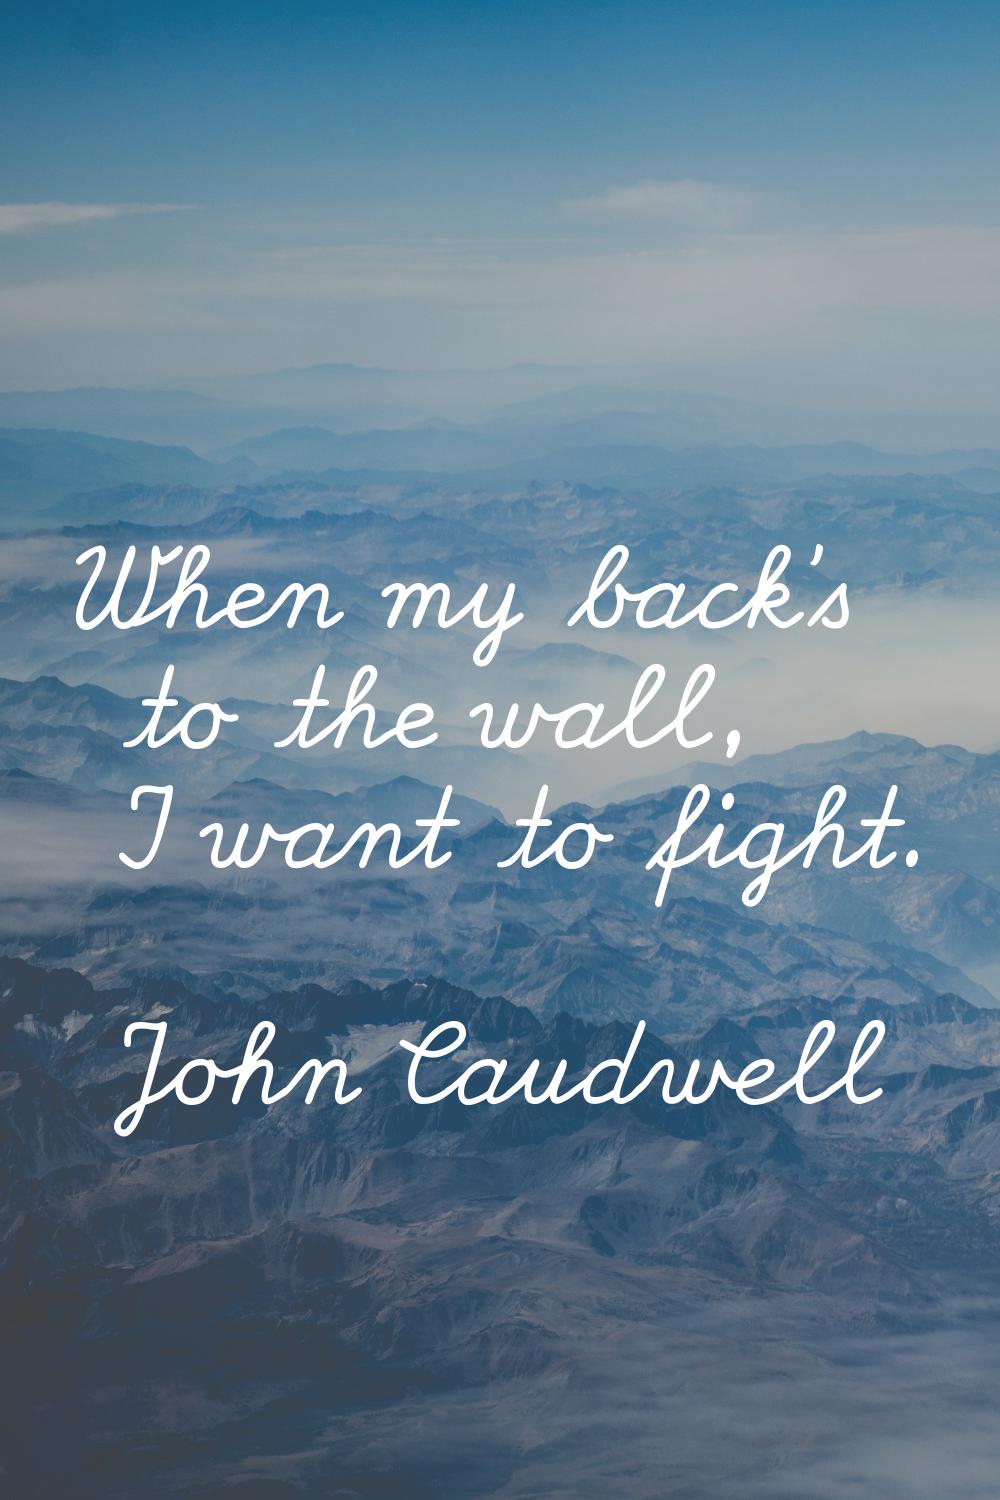 When my back's to the wall, I want to fight.